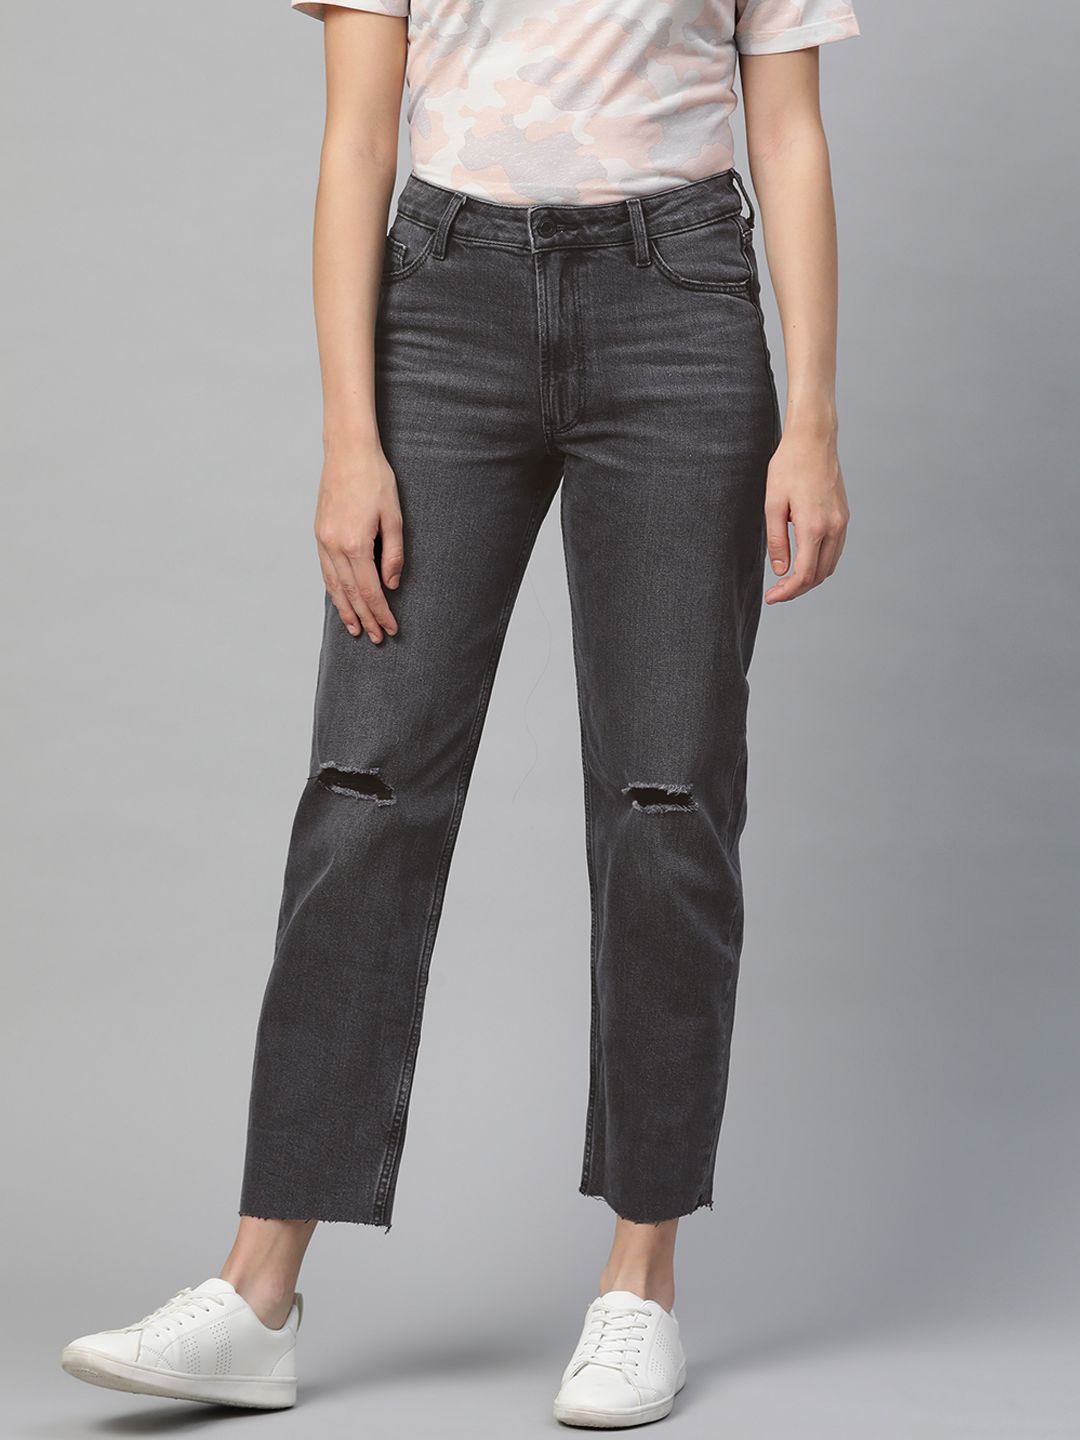 Marks & Spencer Women Charcoal Grey Boyfriend Fit Slash Knee Stretchable Jeans Price in India